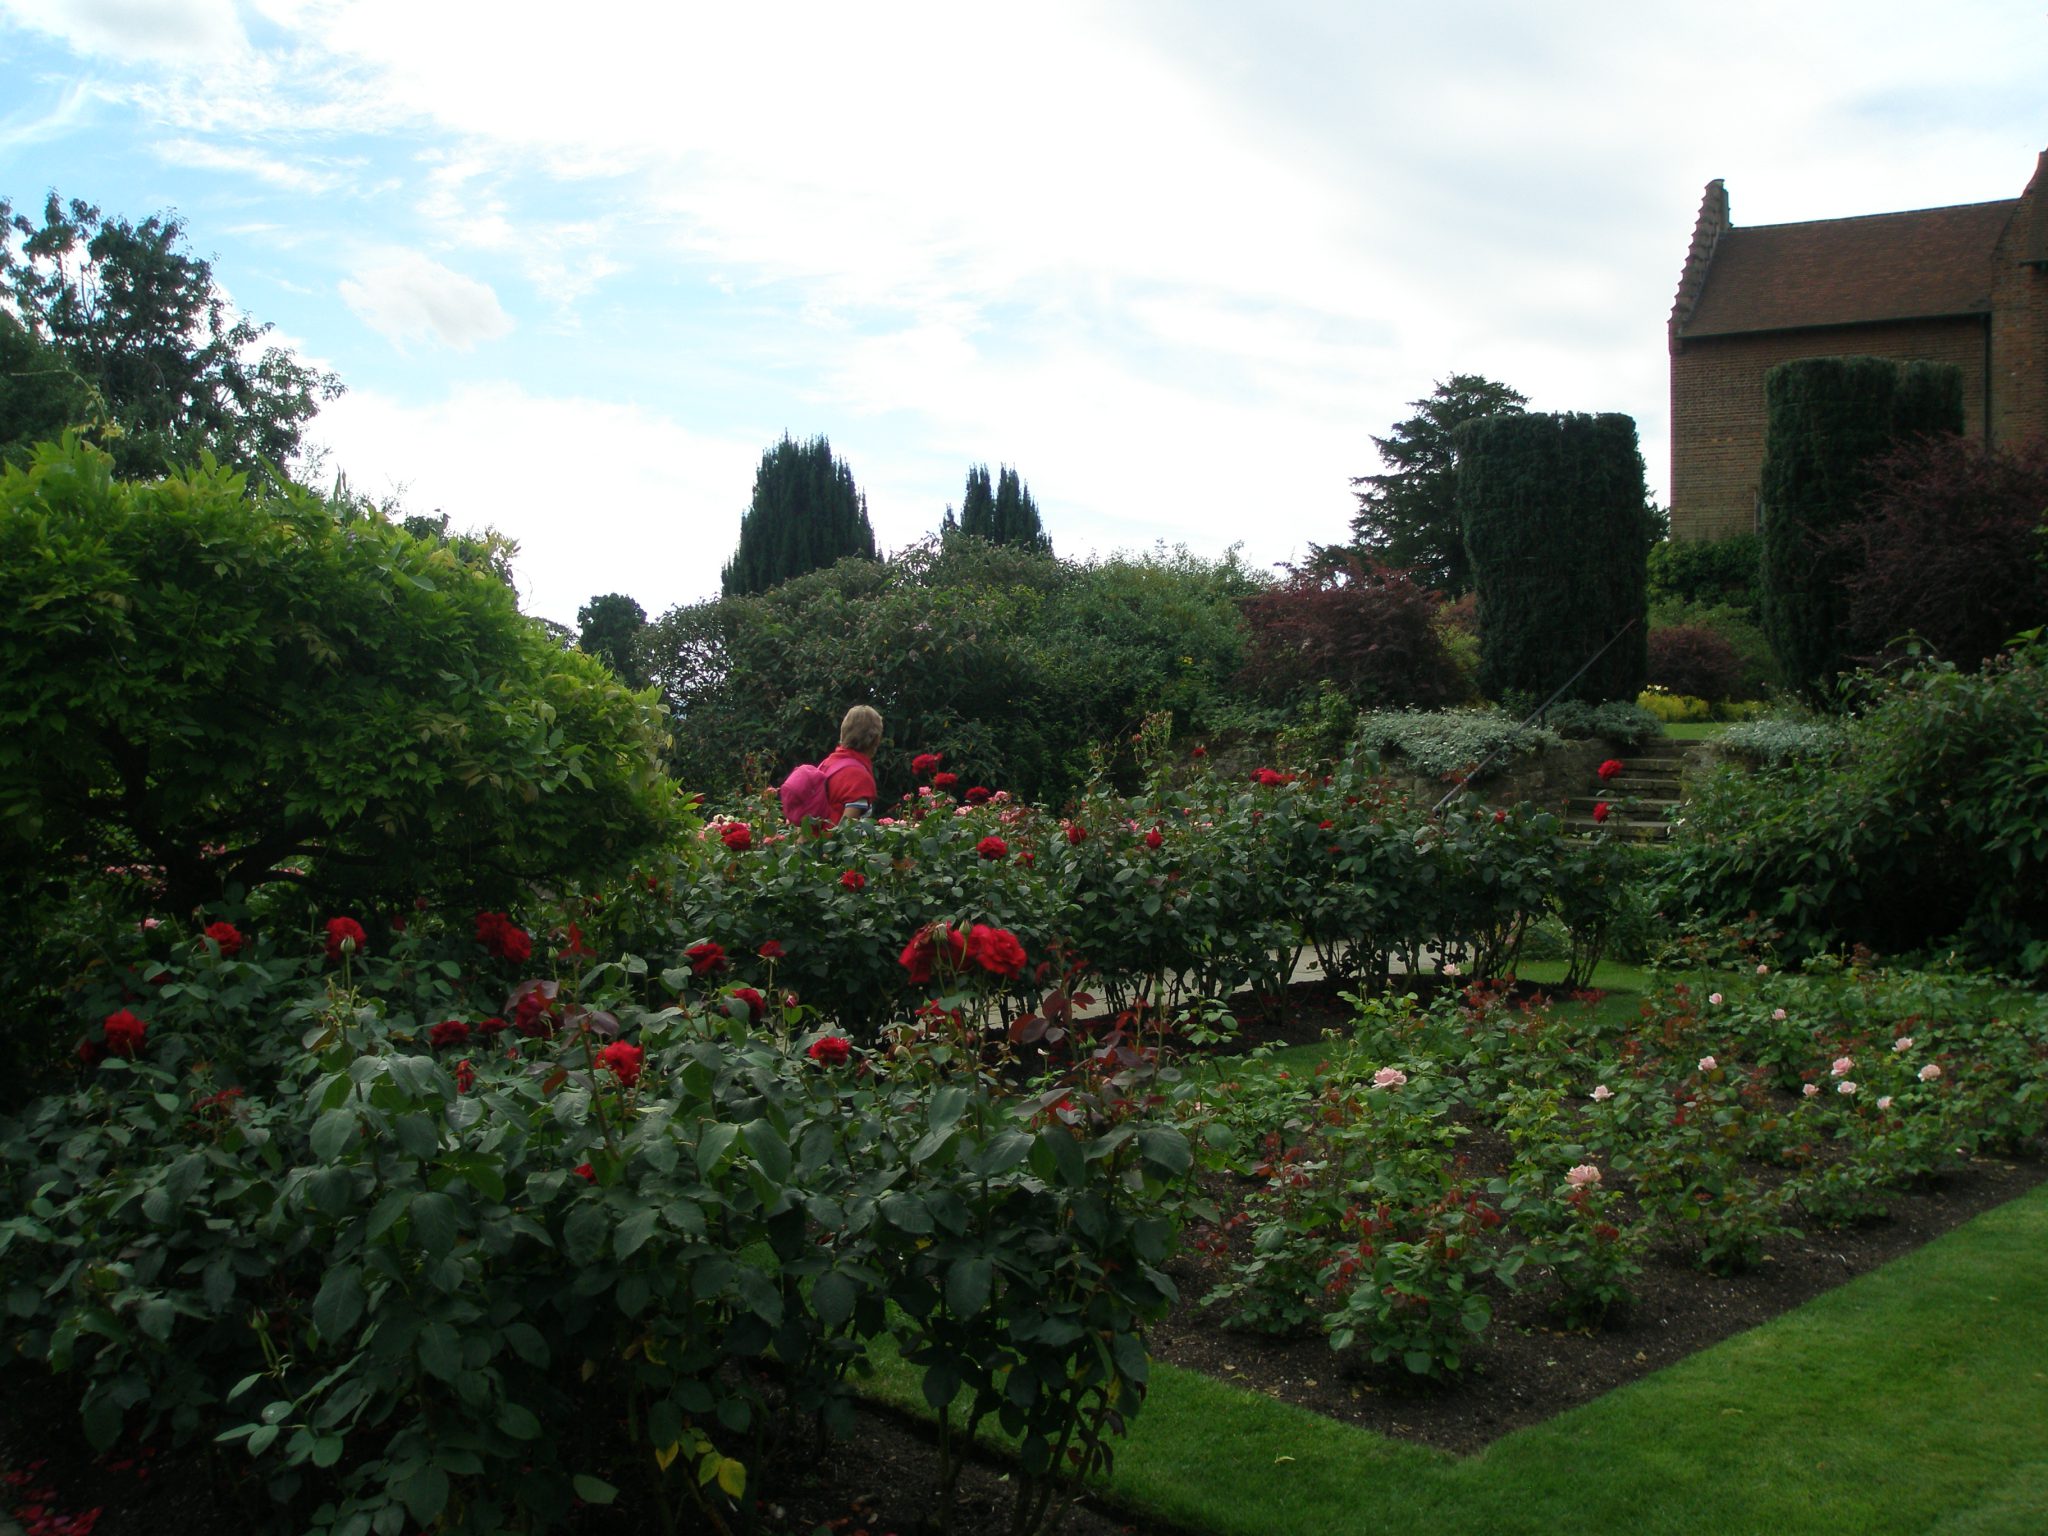 Lady Churchill's Rose Garden is divided into four beds that contain hybrid tea roses.